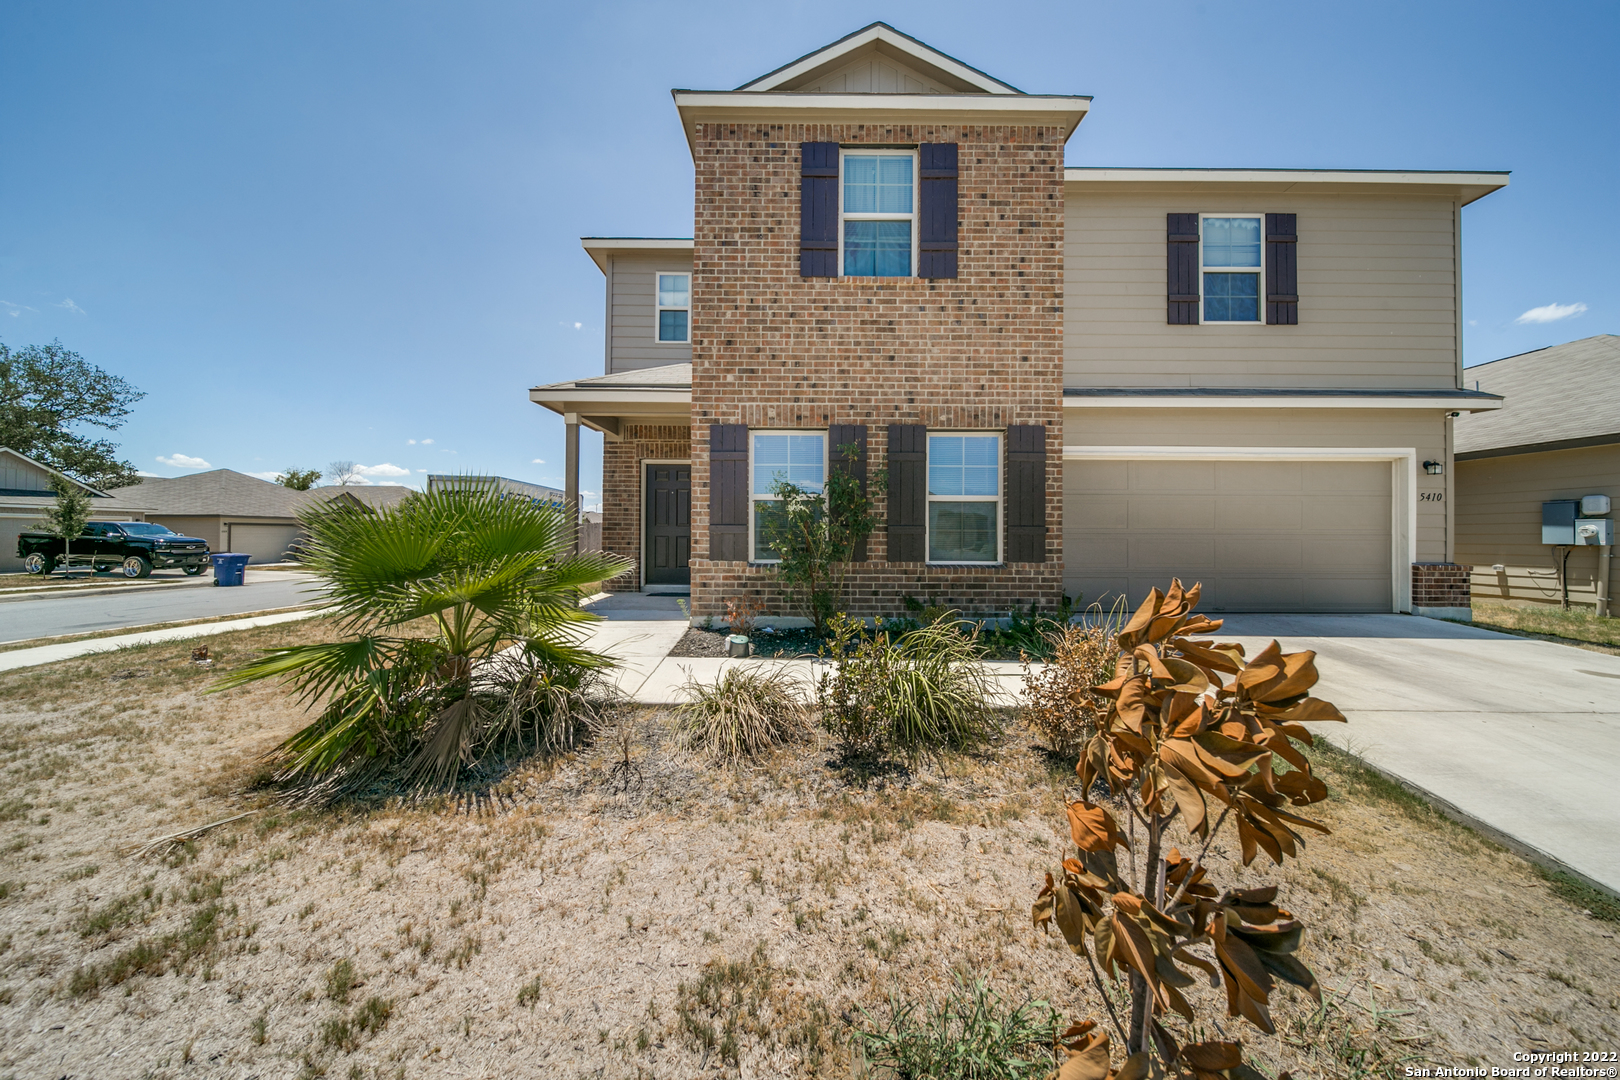 **$3,000 seller incentive towards closing costs** Welcome to this beautiful 4 bed 2 1/2 bath in the brand new neighborhood of Sage Valley. This home was built in 2019, has an open floor plan, all rooms upstairs with a large loft that can be used as an office, game room or media room.   Property is located on a corner lot with a spacious backyard. Make your appointment today!